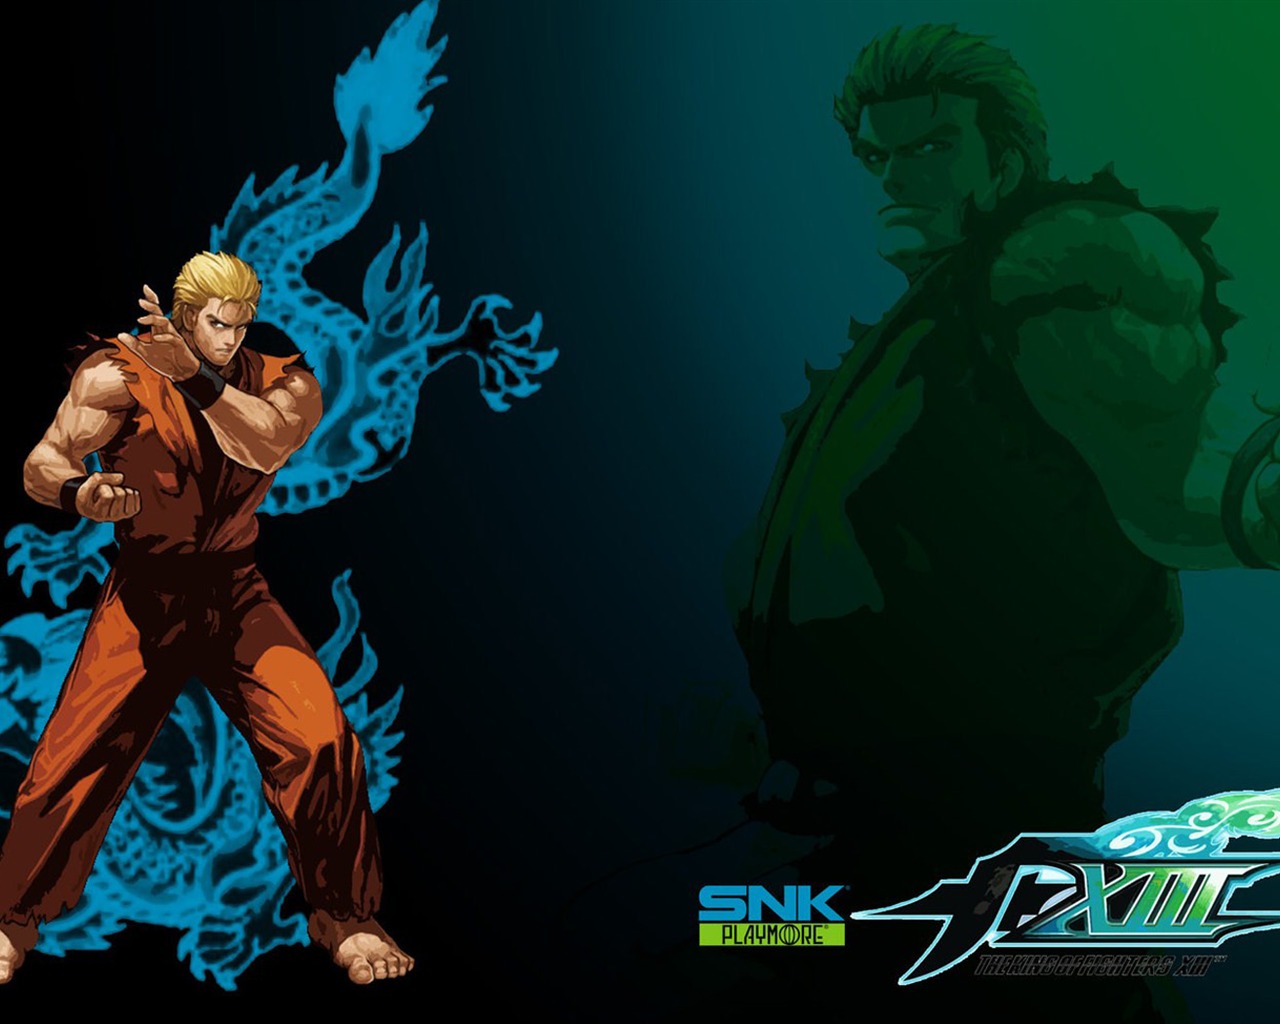 Le roi de wallpapers Fighters XIII #2 - 1280x1024